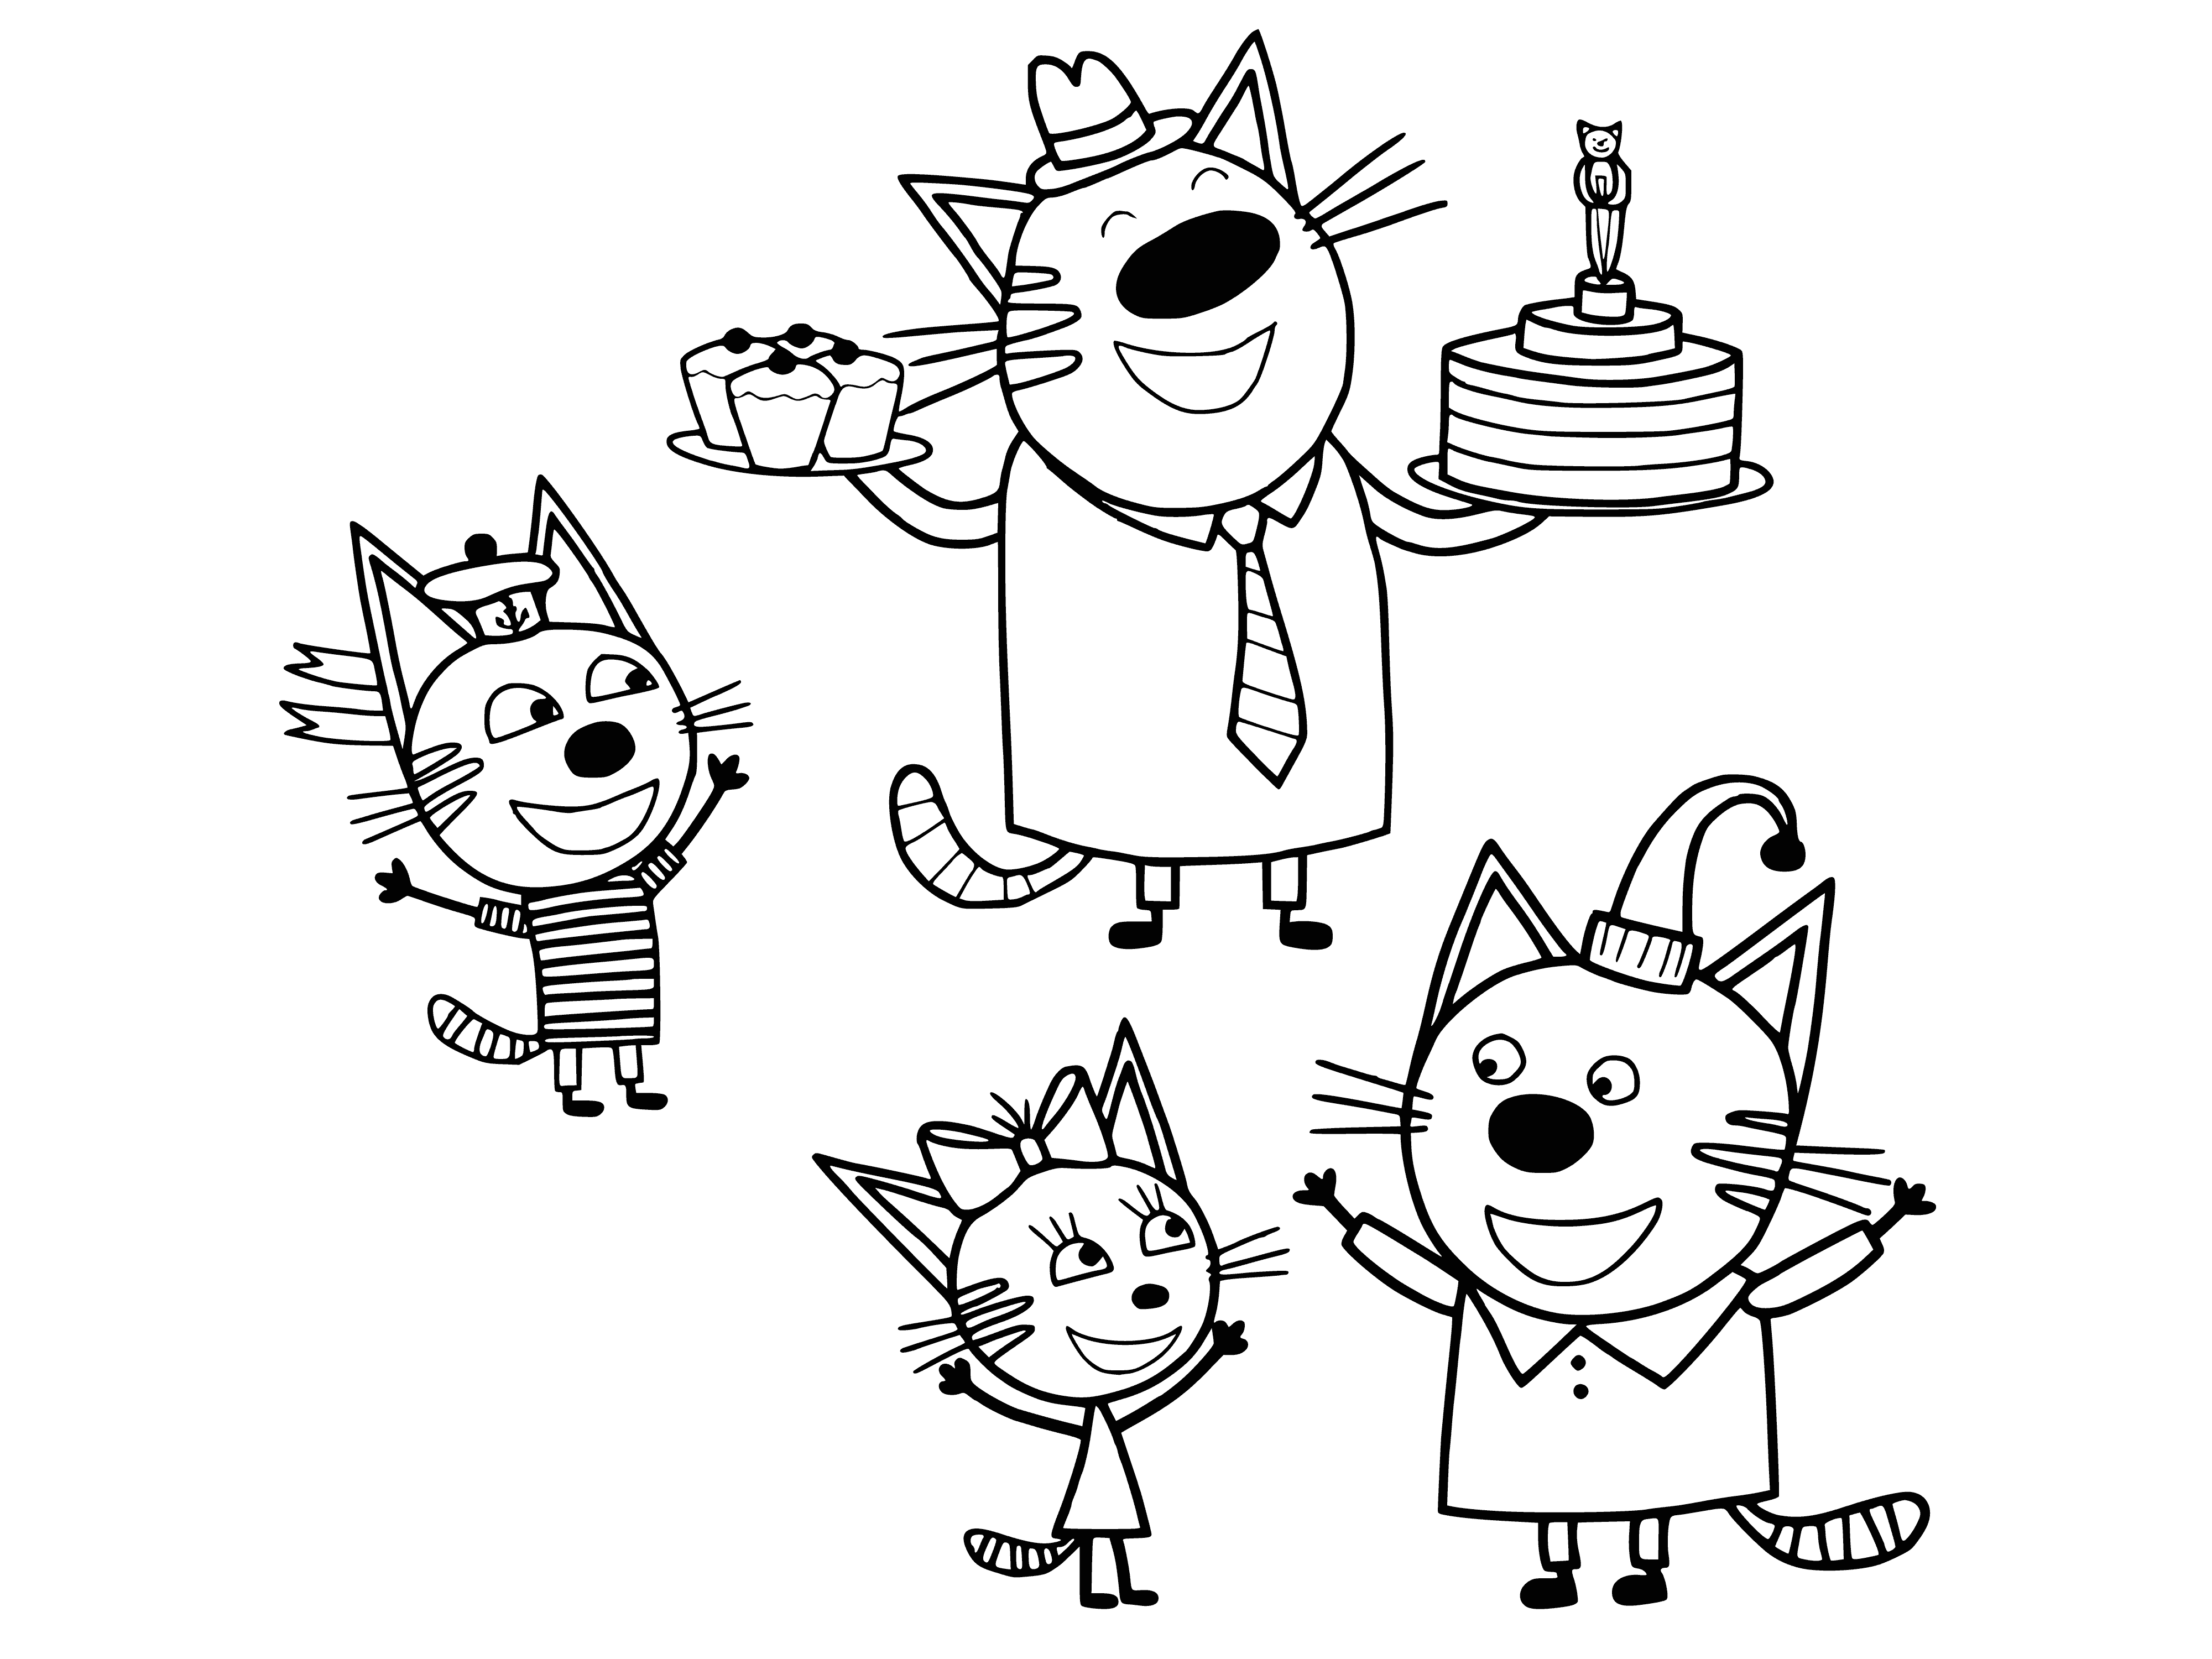 coloring page: 3 cats in a coloring page: 2 sit, 1 stands. They are gray/white, black/white & facing same dir.